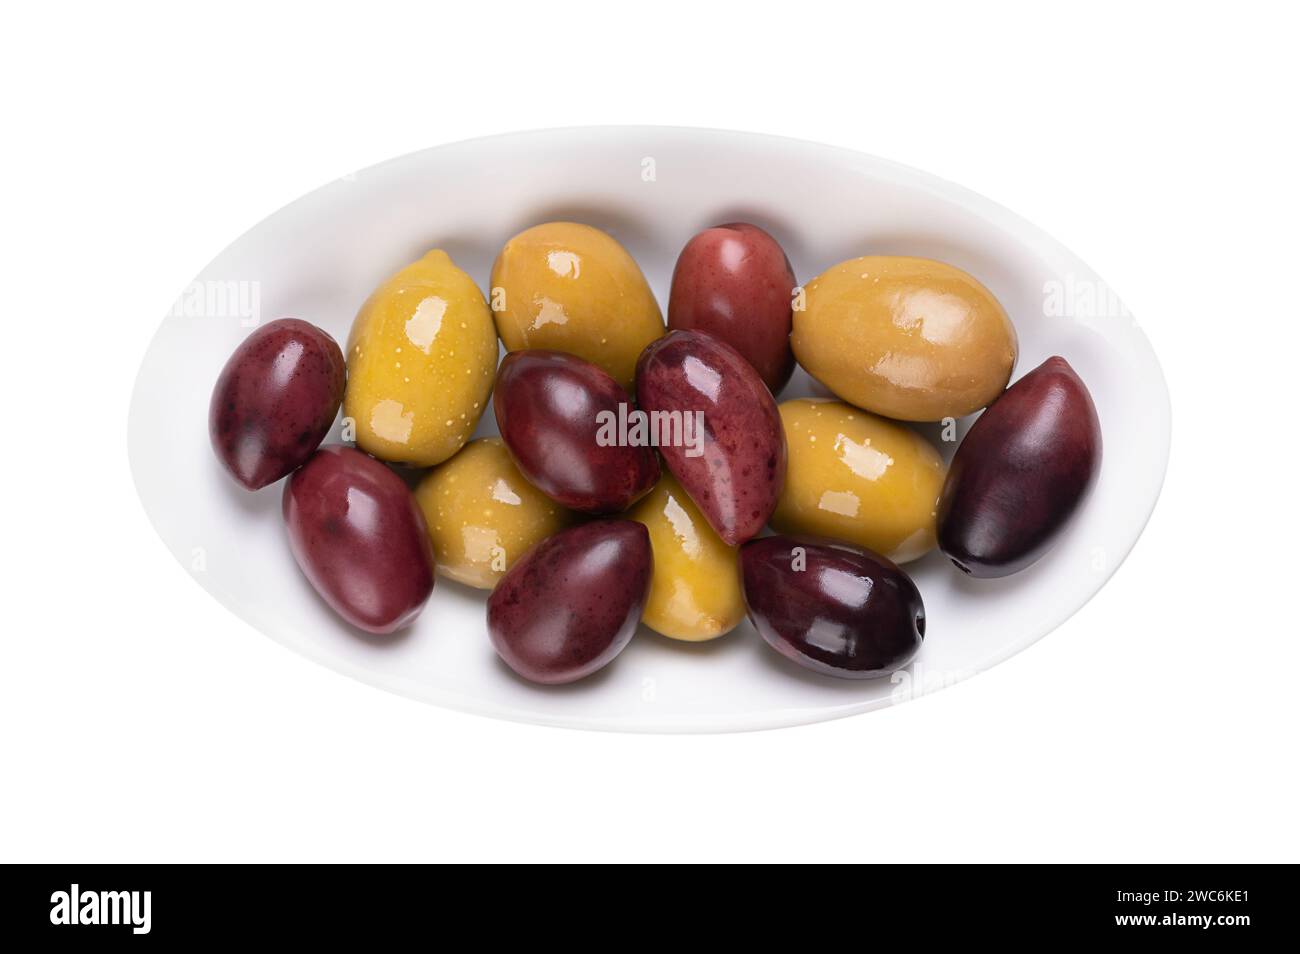 Kalamata and green olives with pit, pickled whole, large Greek table olives, in a white oval bowl. Stock Photo